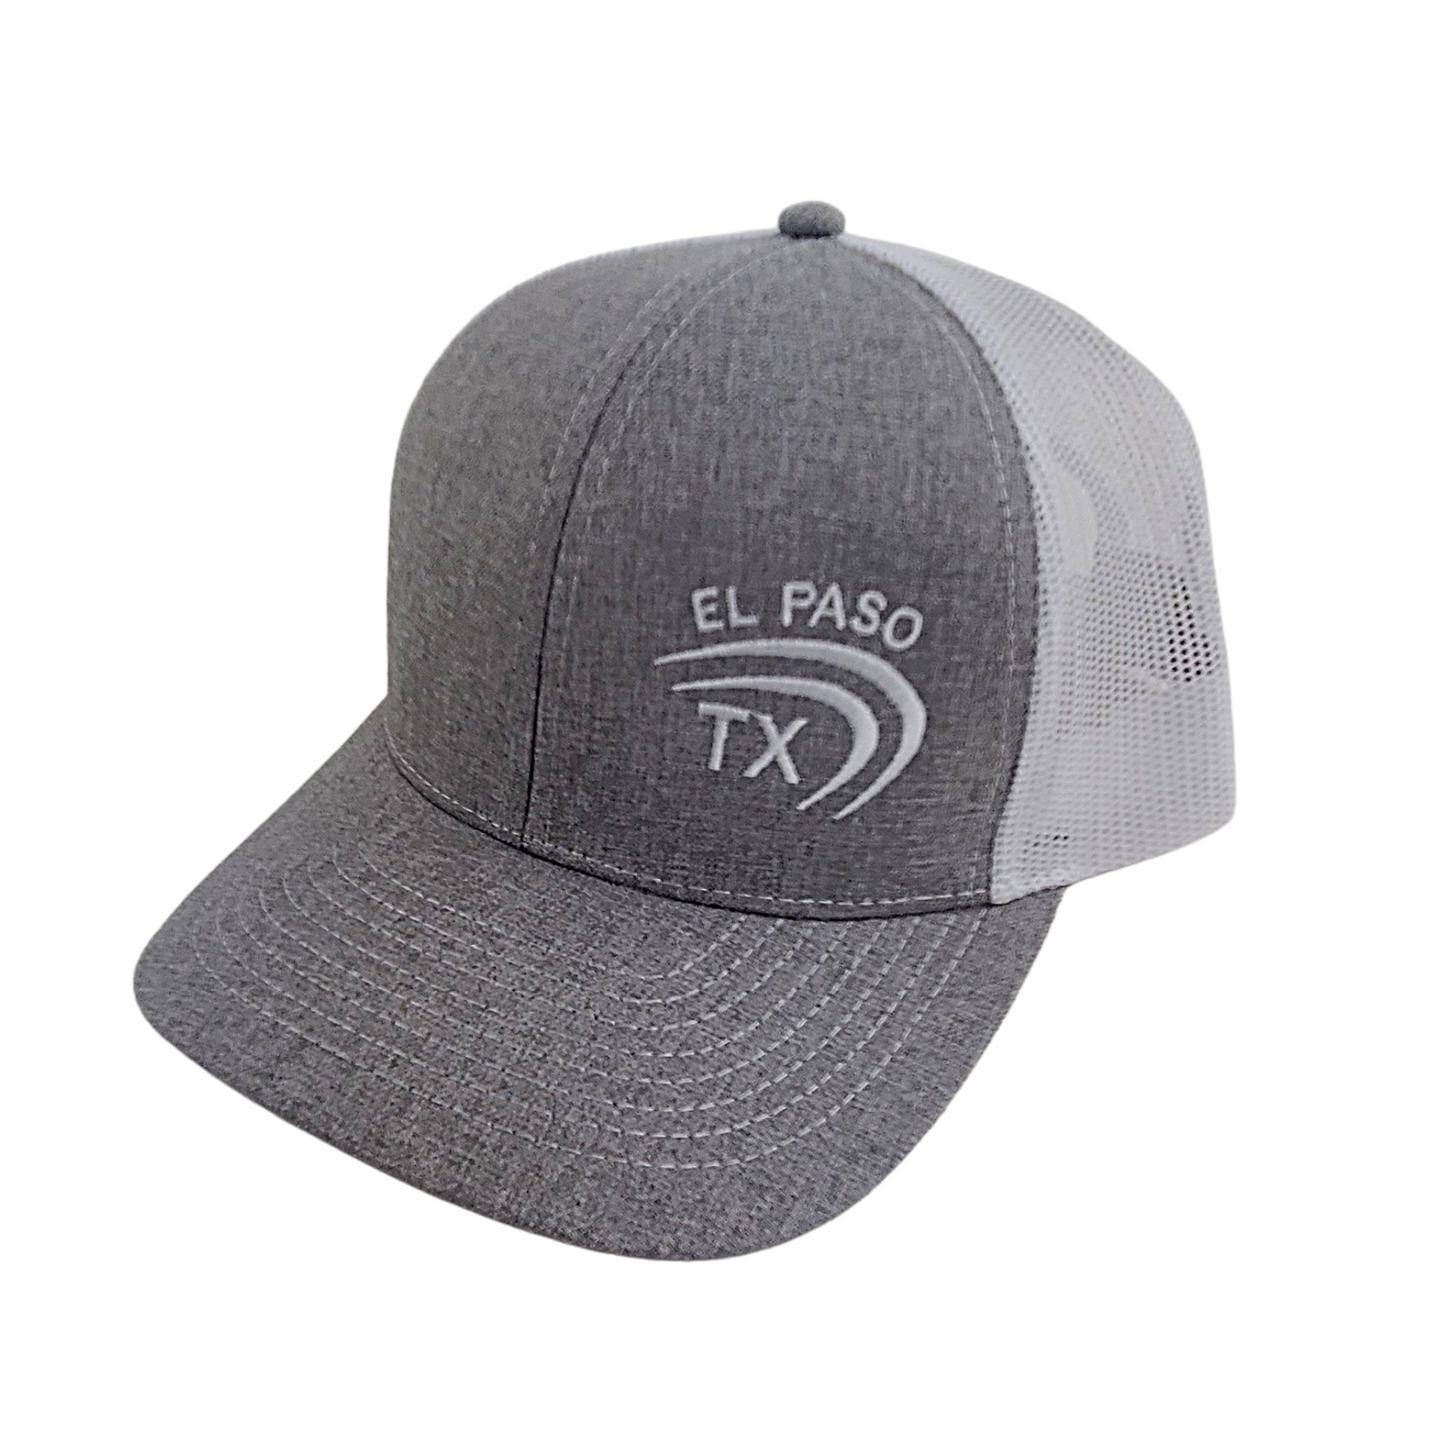 Hat - Vintage Grey with White Mesh